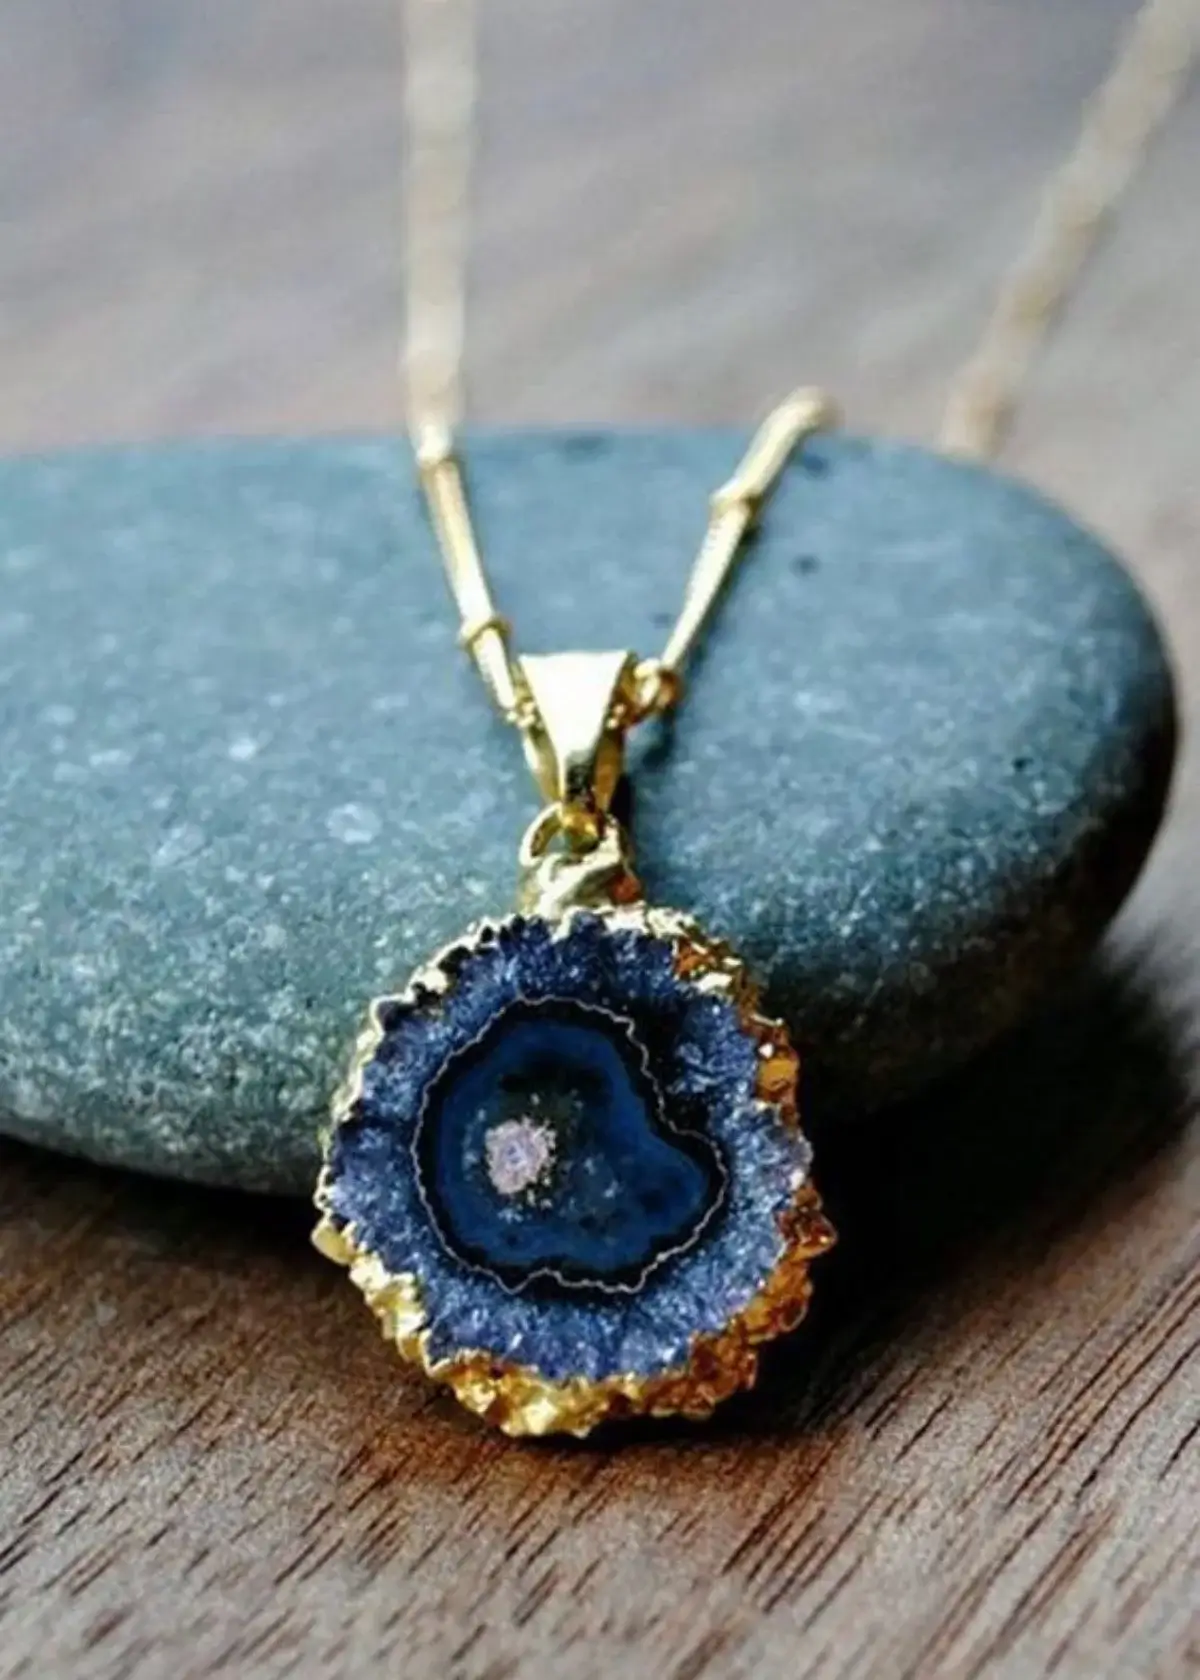 What type of geodes are typically used in Geode Necklaces?